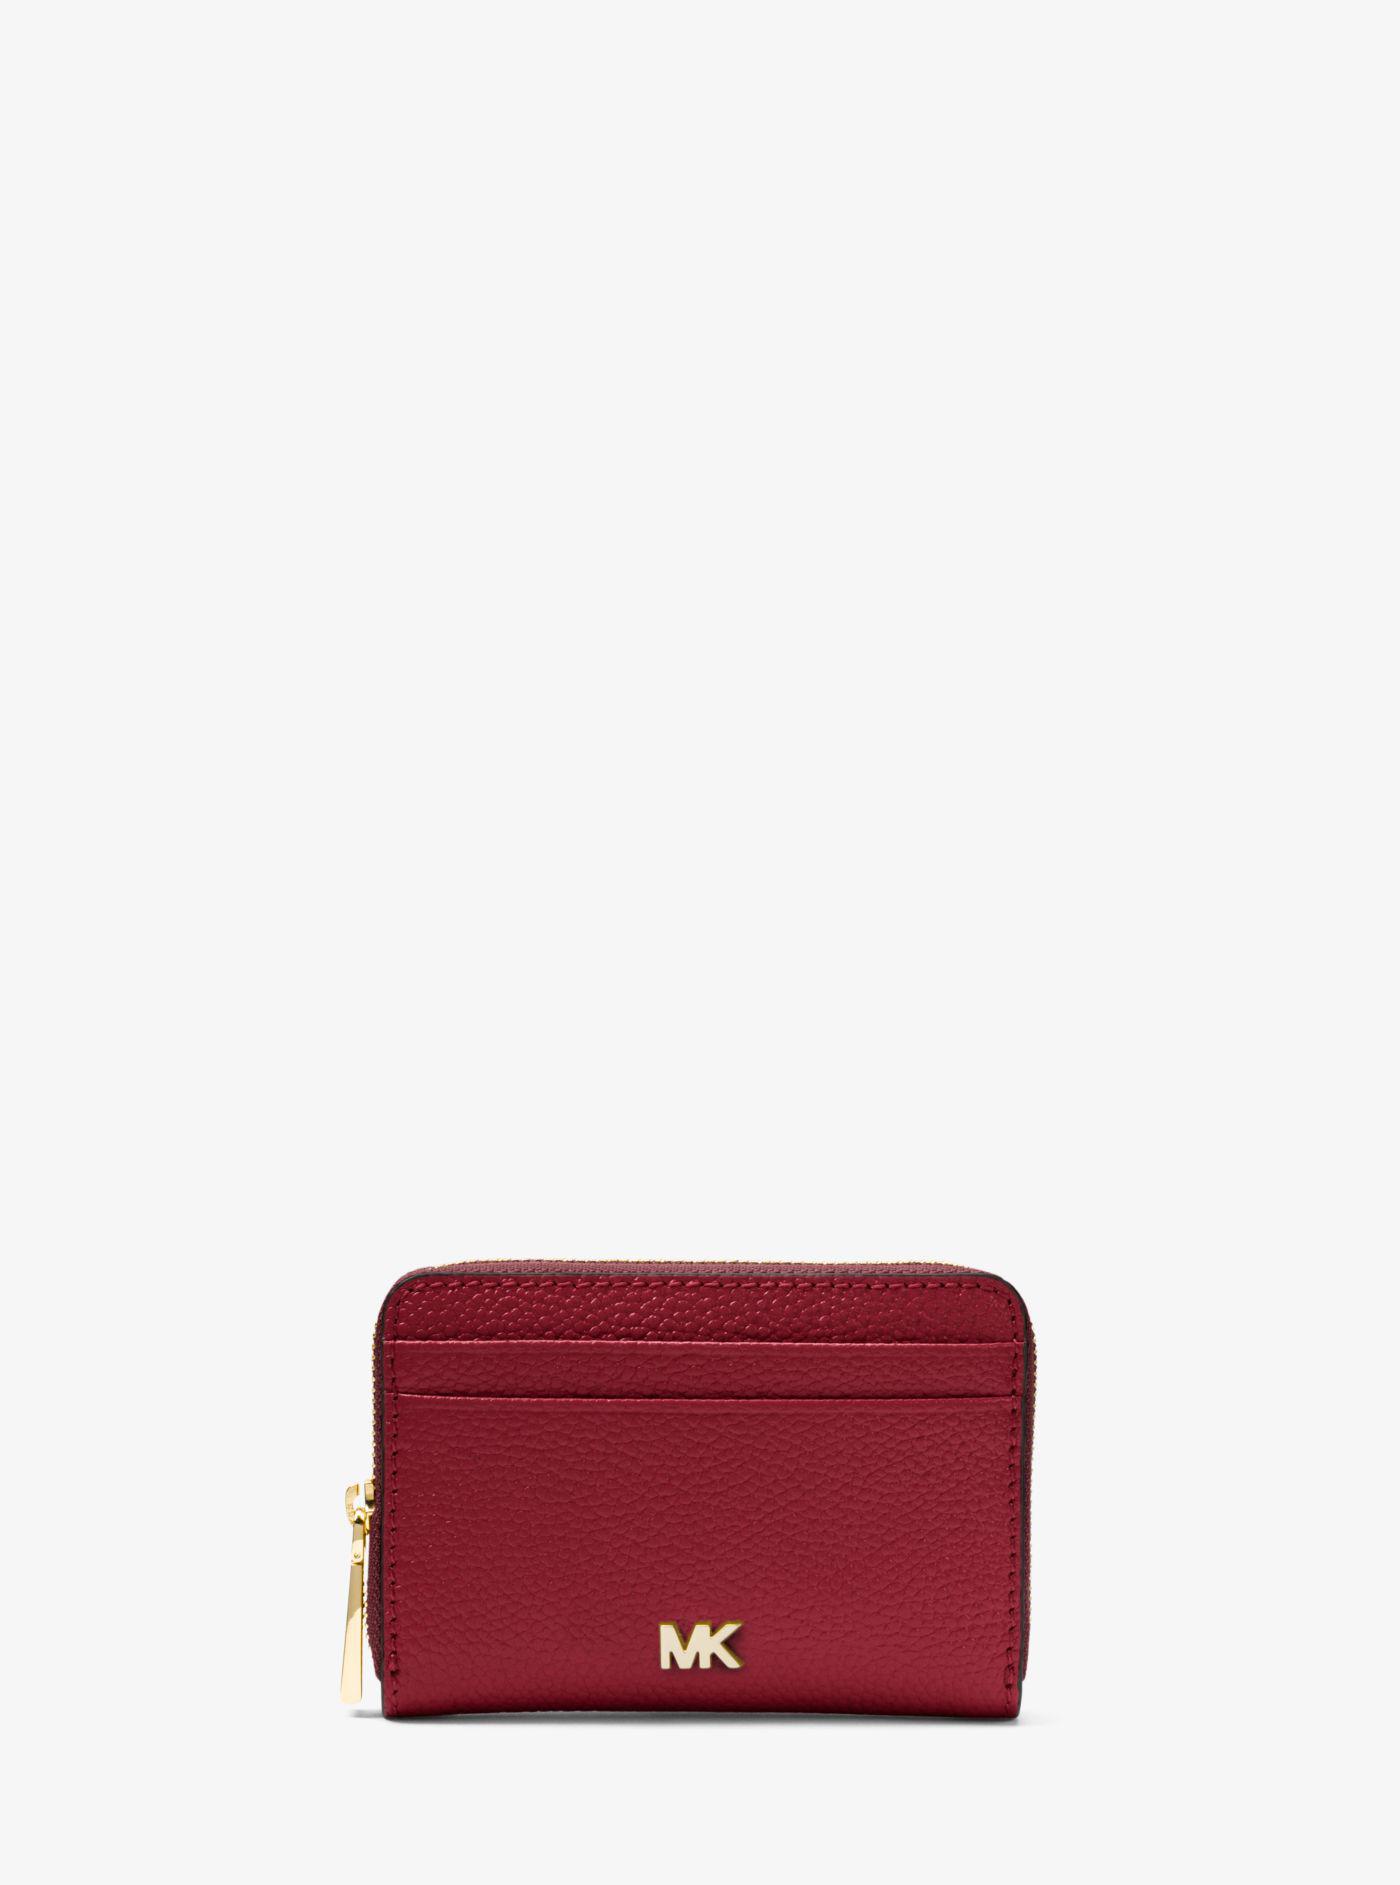 Michael Kors Small Pebbled Leather 